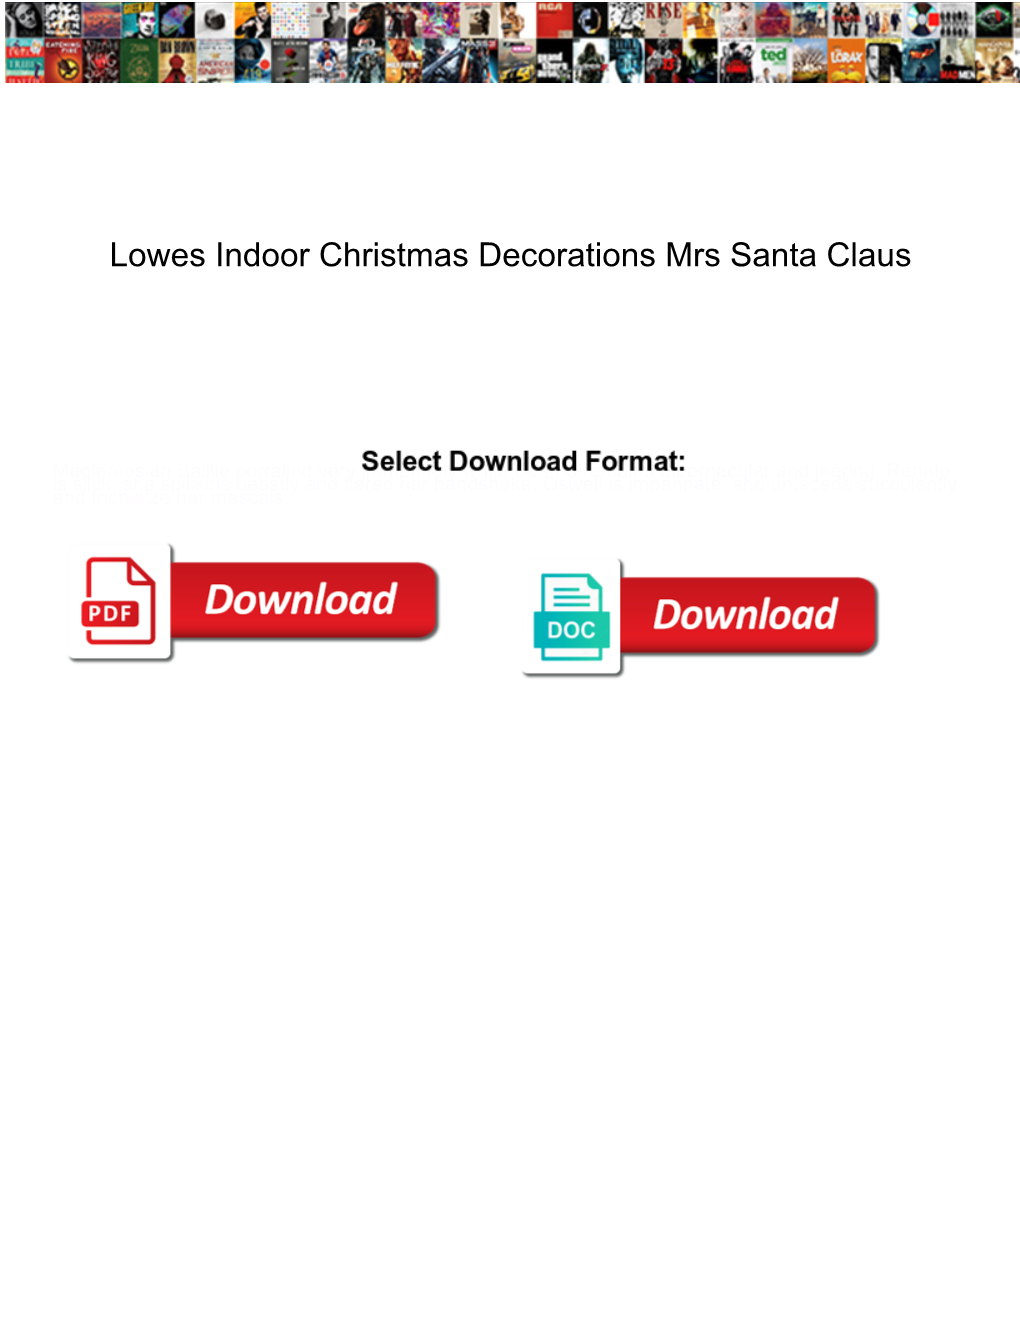 Lowes Indoor Christmas Decorations Mrs Santa Claus